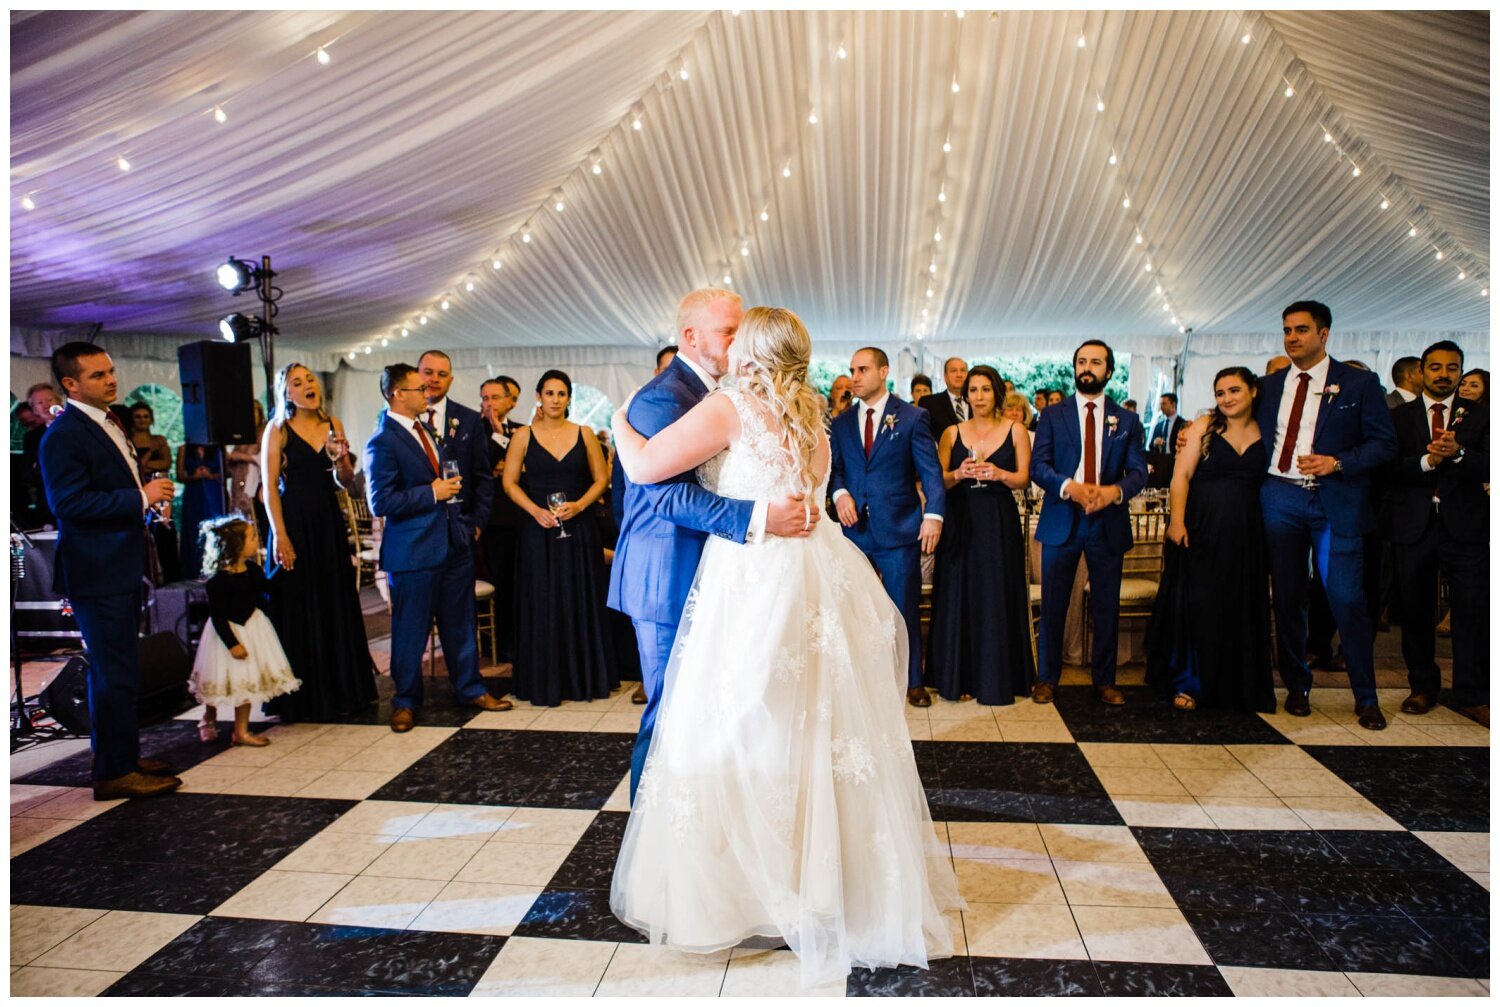 Birkby House Wedding reception bride and groom first dance